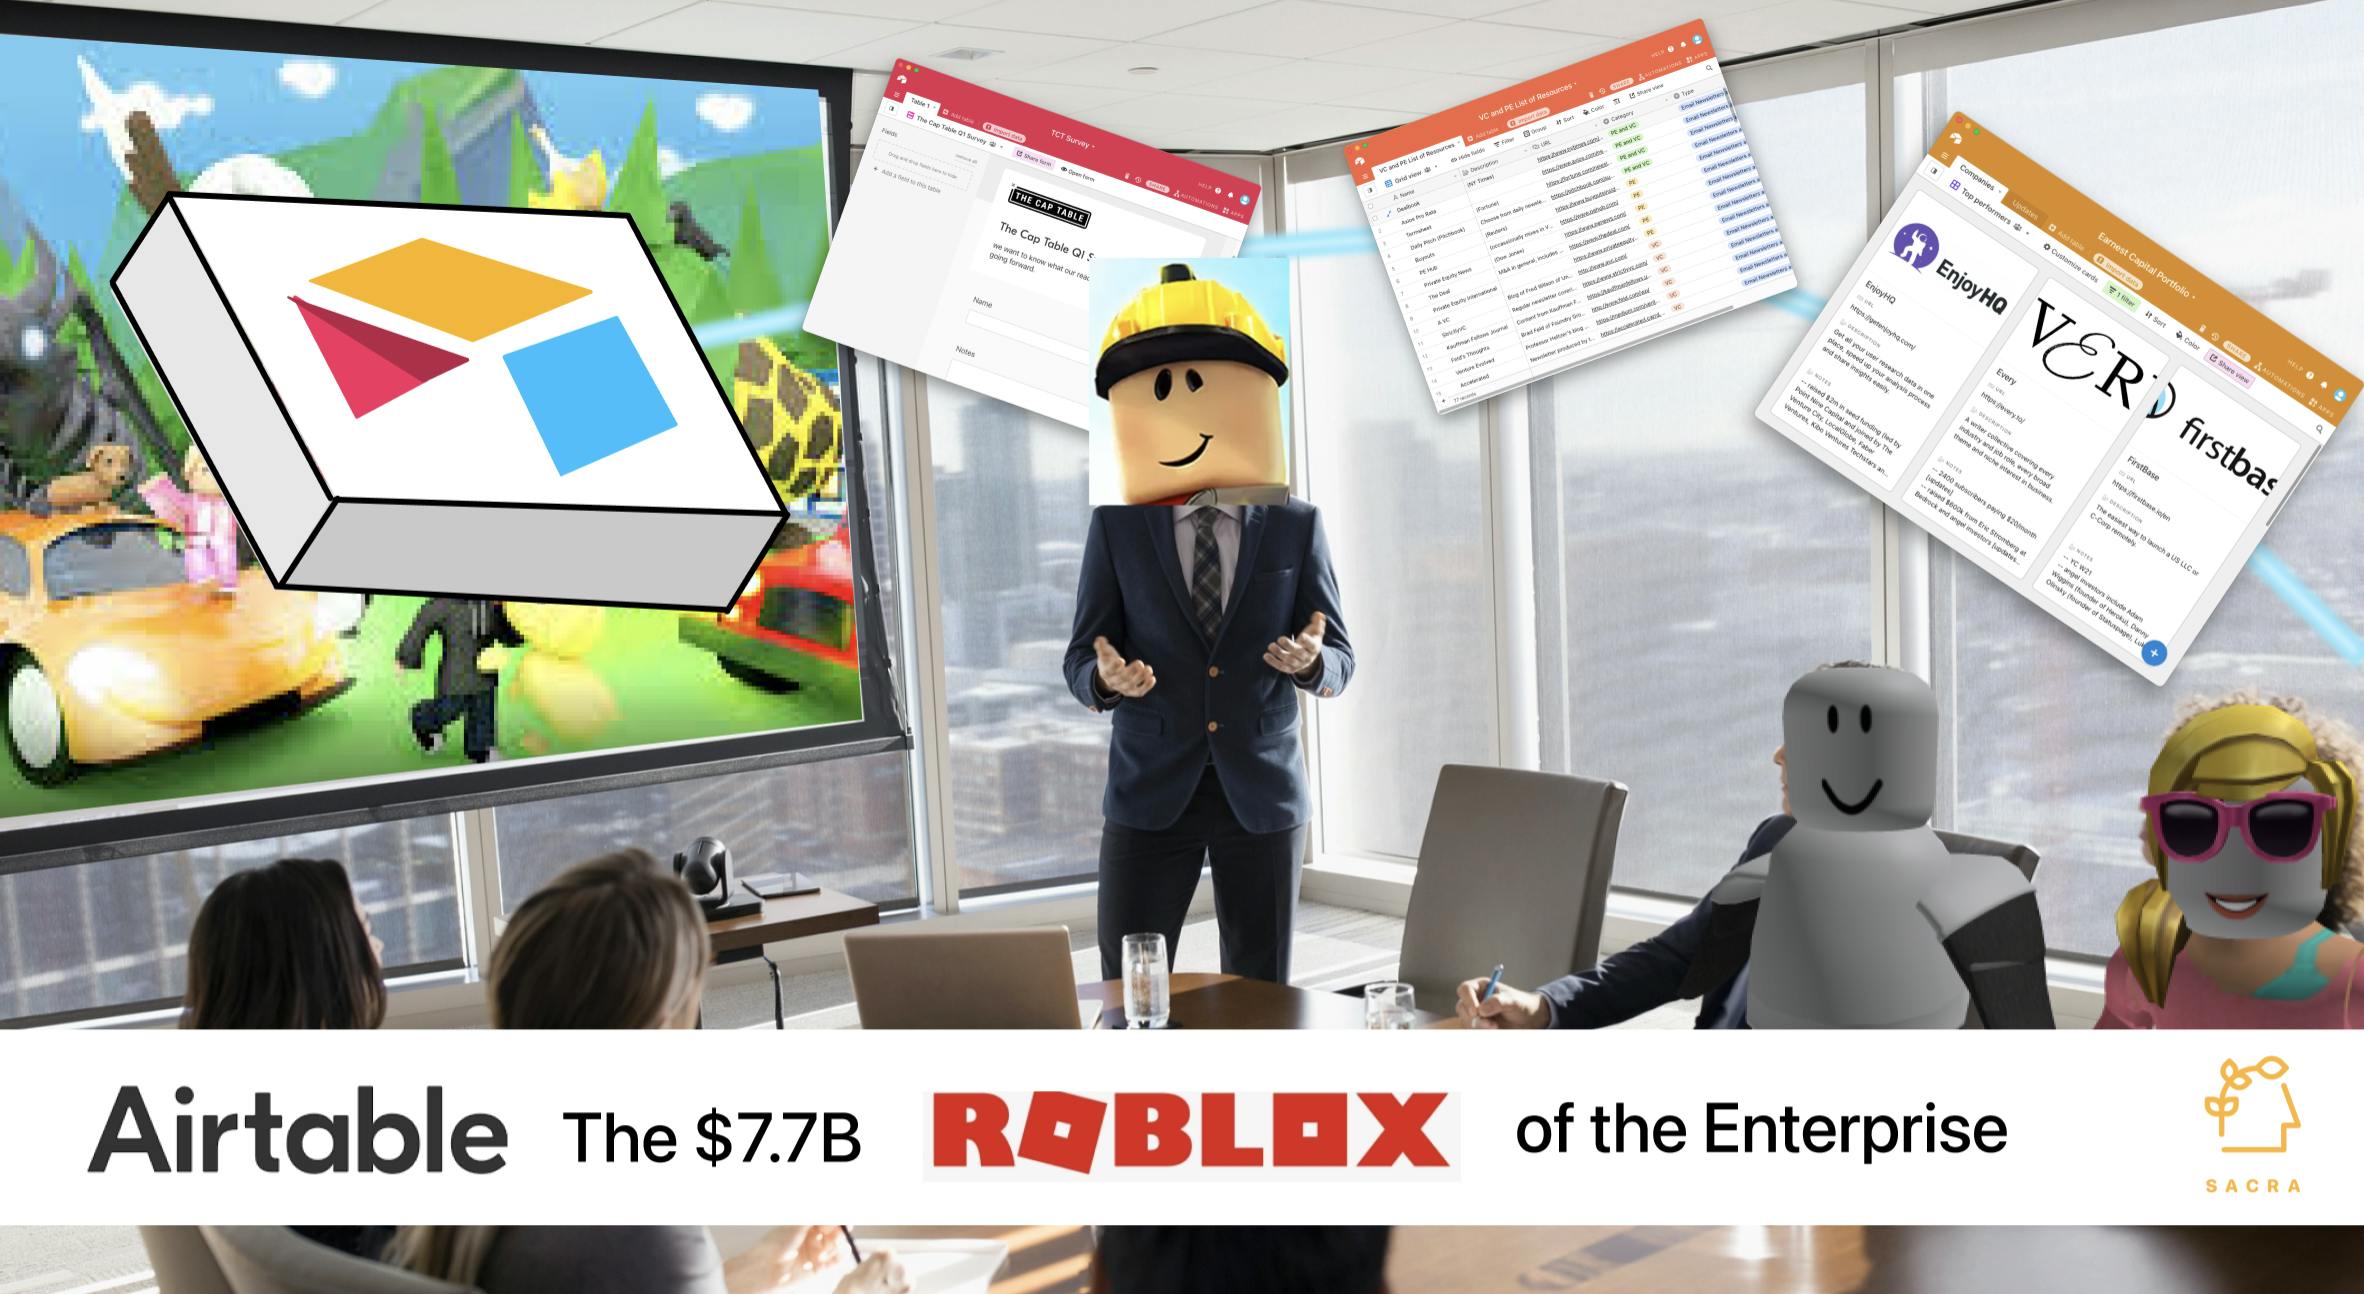 Roblox: Excellent Company, But High Valuation 